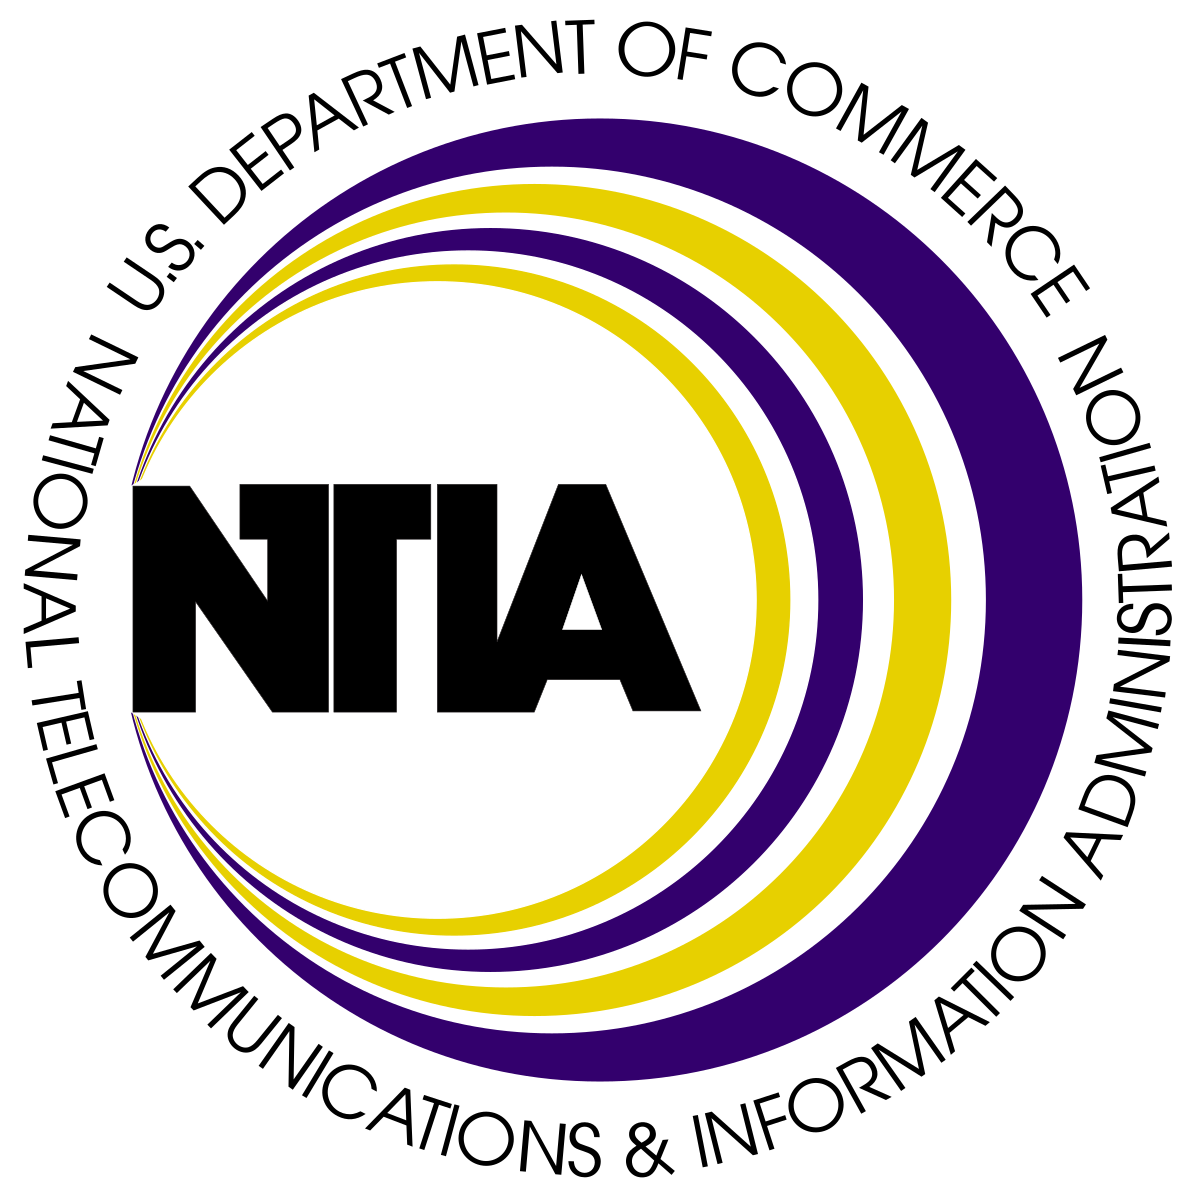 NTIA Announces Availability of $1 Billion in Digital Equity Grant Funding